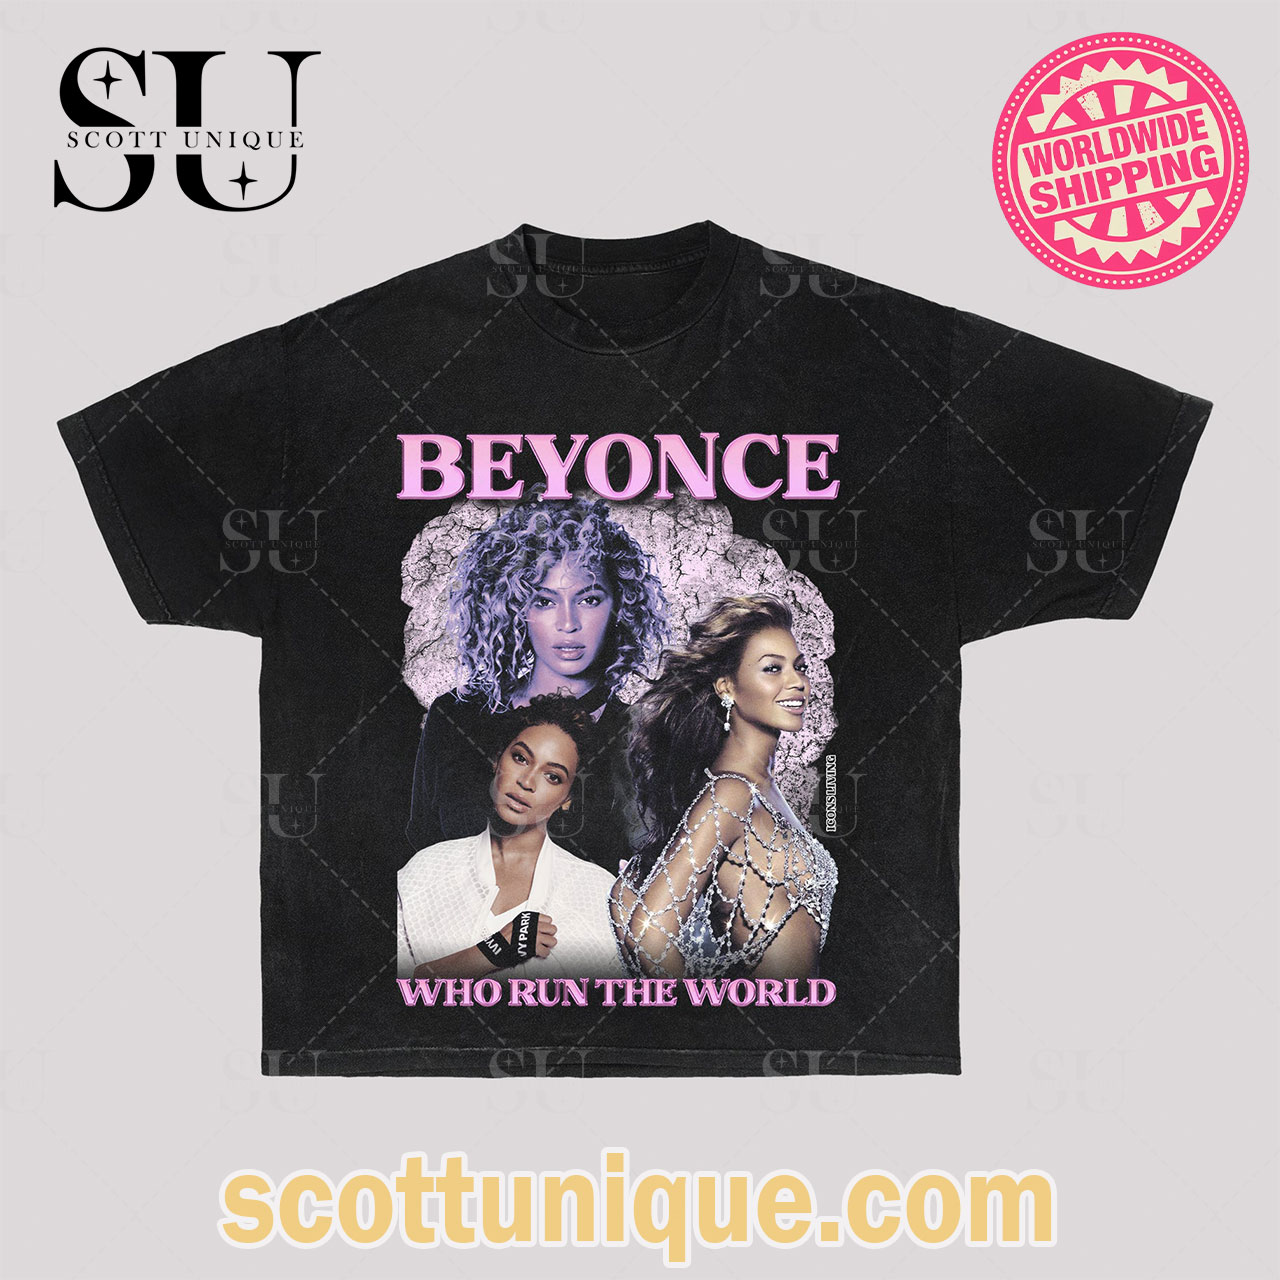 Beyonce Vintage Style Music T-Shirt